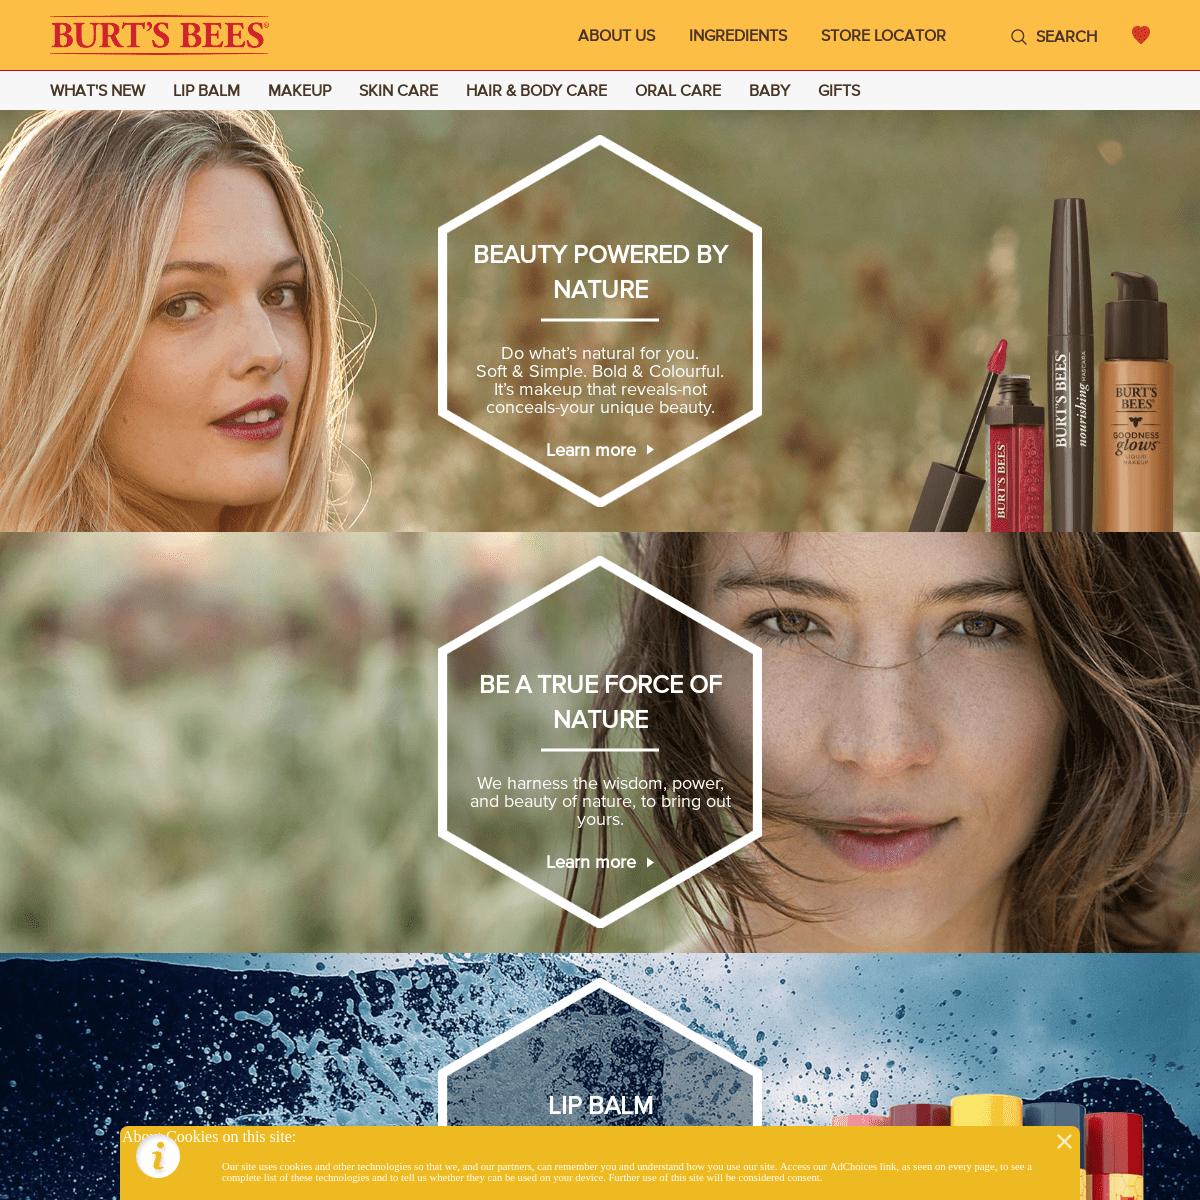 Natural Personal Care Products For Lips, Face & Body - Burt's Bees